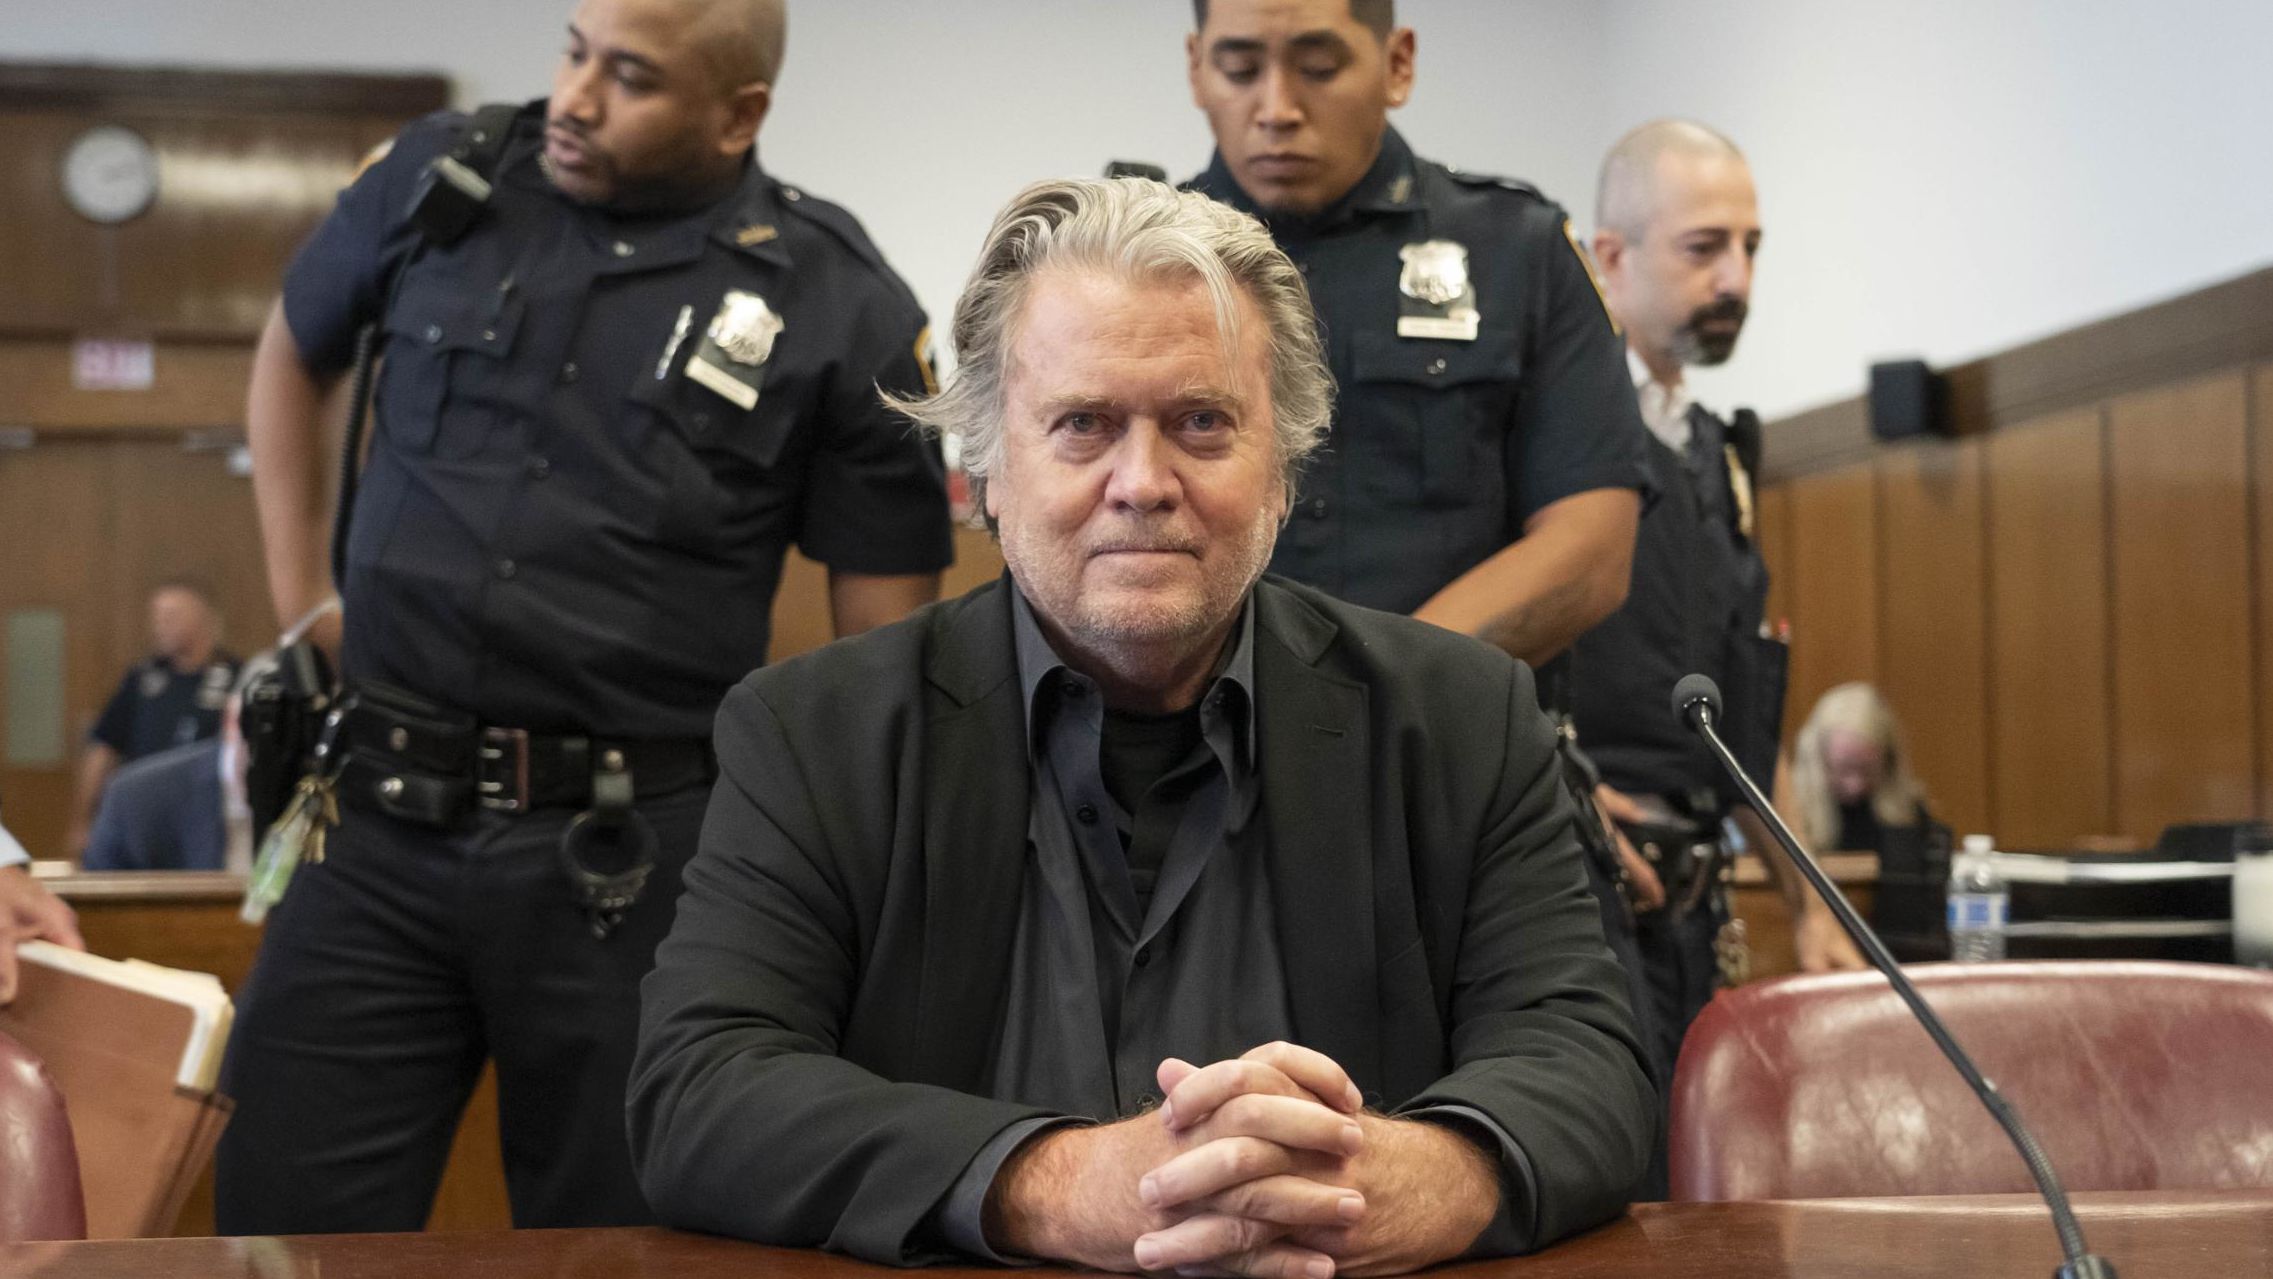 Steve Bannon, former adviser to Donald Trump, attends his arraignment in New York on Thursday, September 8. <a href="https://www.cnn.com/2022/09/08/politics/steve-bannon-not-guilty-plea-surrender-border-wall-charges/index.html" target="_blank">Bannon has pleaded not guilty</a> to money laundering and conspiracy charges related to an effort to raise money to fund construction of a wall along the southern US border. The state charges are based on the same conduct Bannon was charged with by federal prosecutors in 2020. Then-President Trump pardoned Bannon on the federal fraud charges related to the alleged scheme as he was leaving office. Presidential pardons do not apply to state investigations.